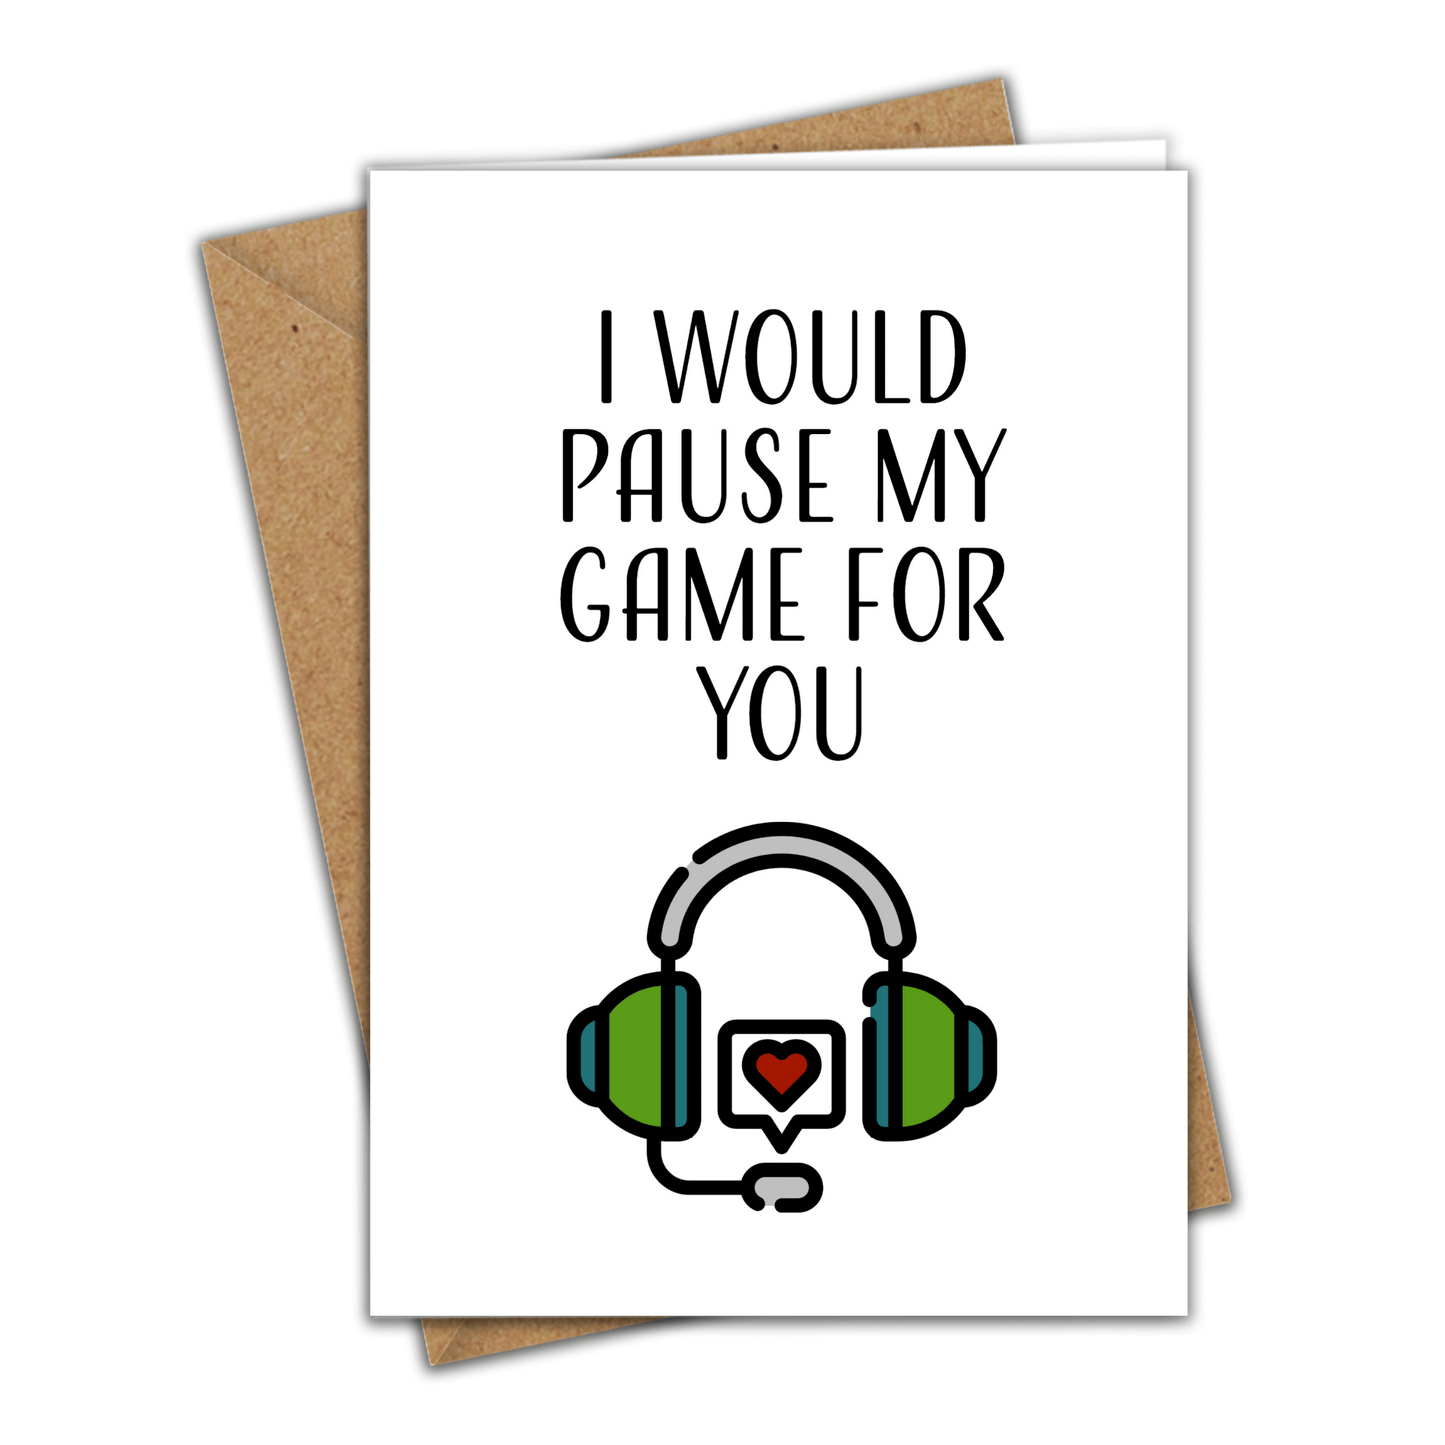 Little Kraken's I Would Pause My Game for You Funny Nerd Gamer Love Anniversary Greeting Card, for £3.50 each